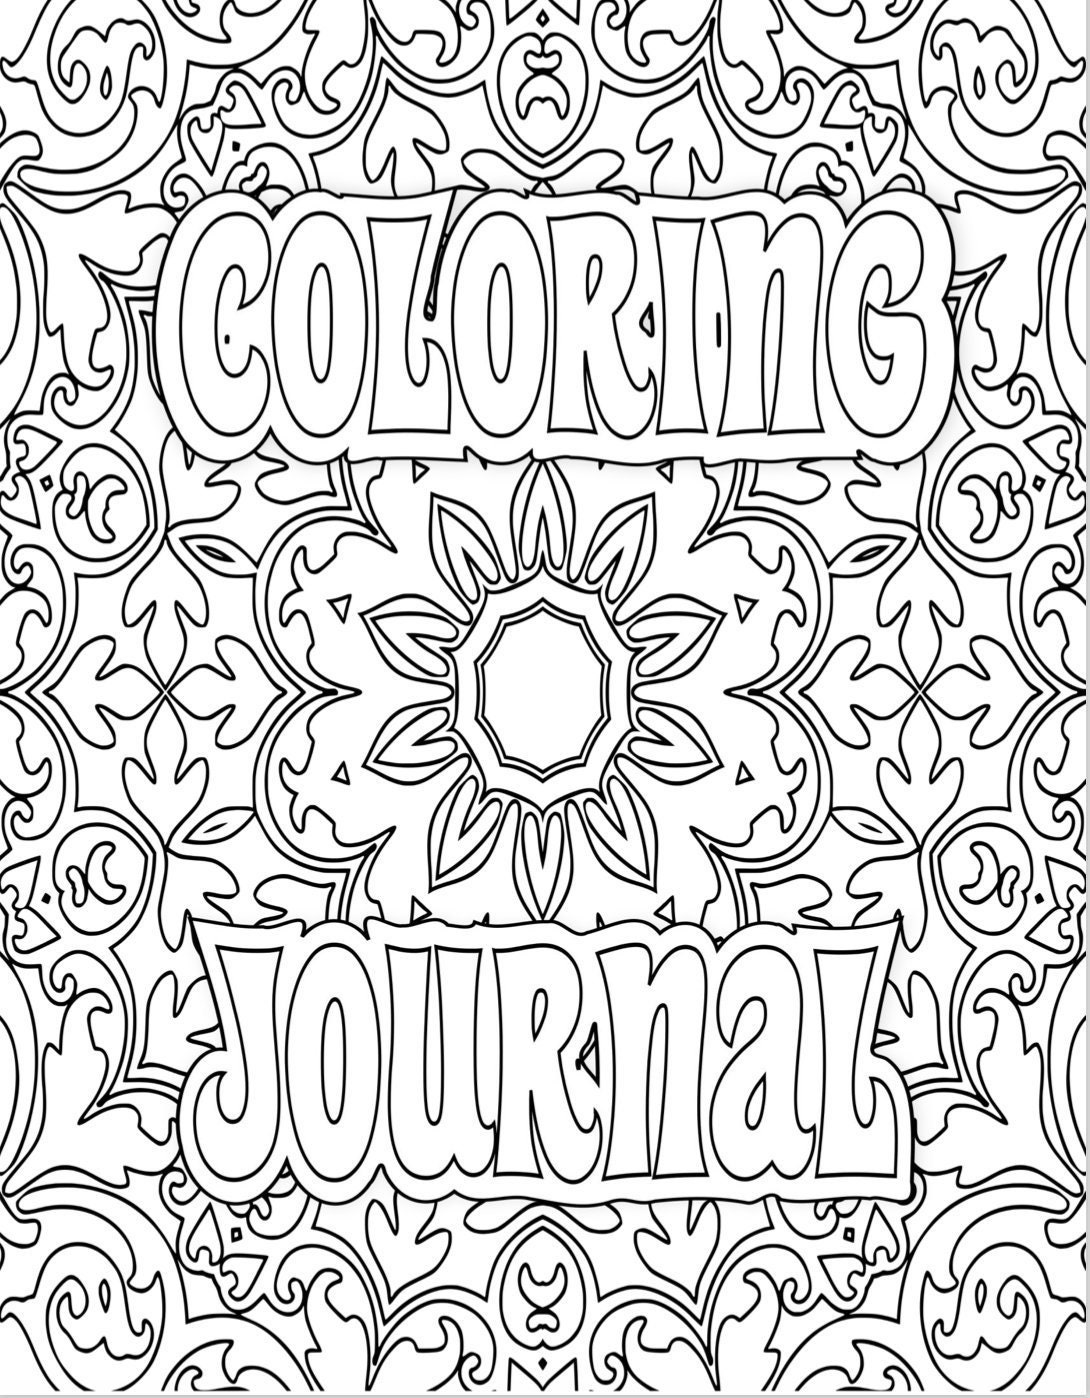 33 COLORING Pages Adult Coloring Book and Journal Meditation Mandala,  Heart, Pattern to Print Color Printable PDF Instant Download 